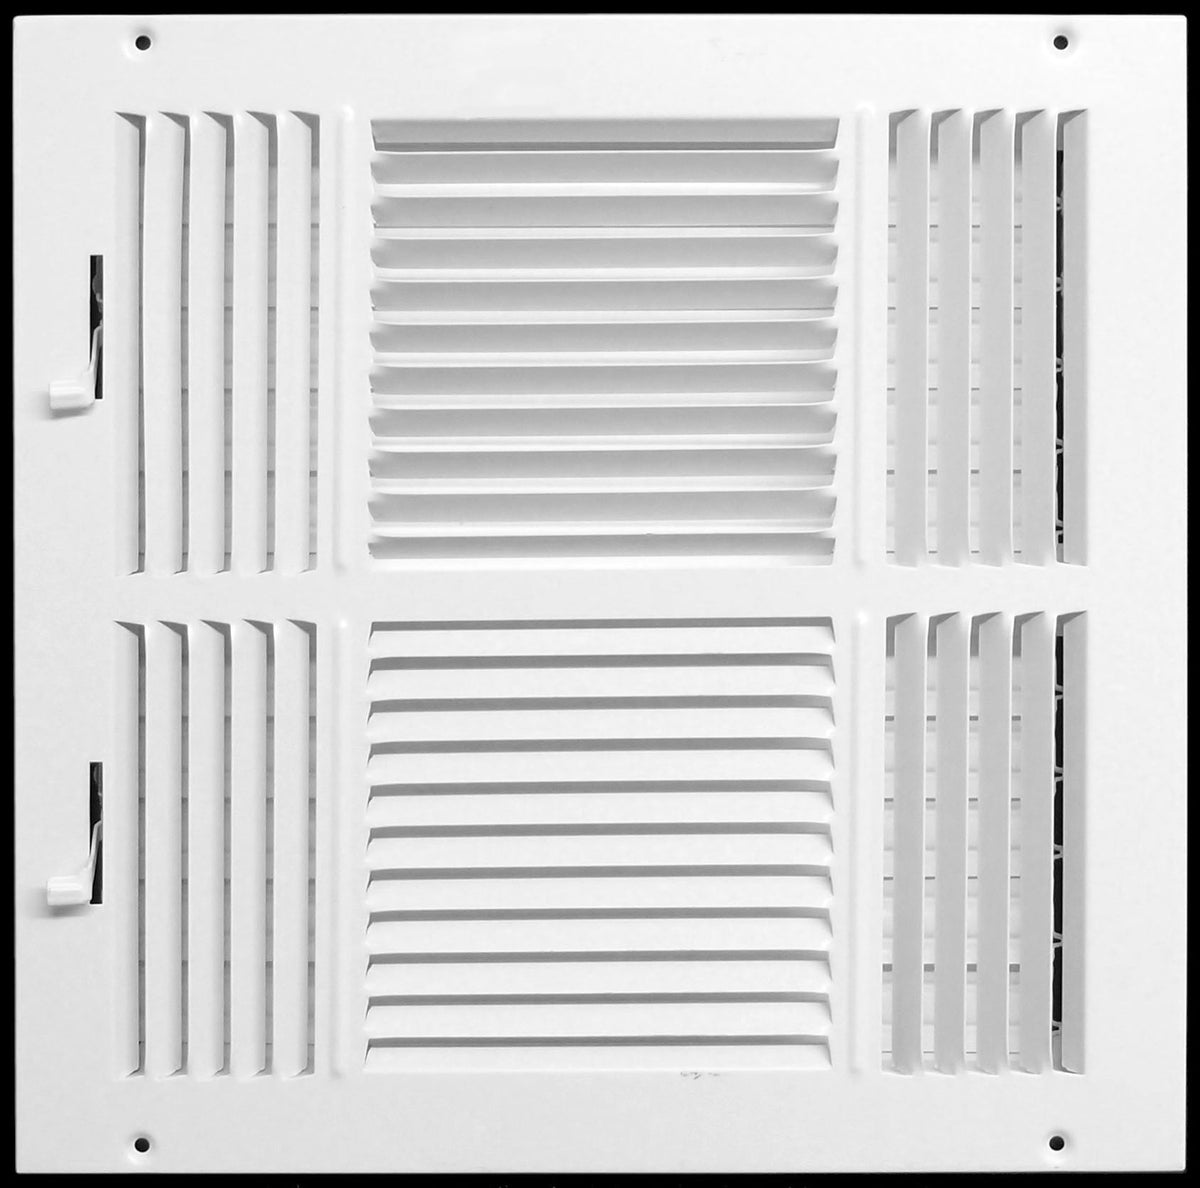 14&quot; X 14&quot; 4-Way AIR SUPPLY GRILLE - DUCT COVER &amp; DIFFUSER - Flat Stamped Face